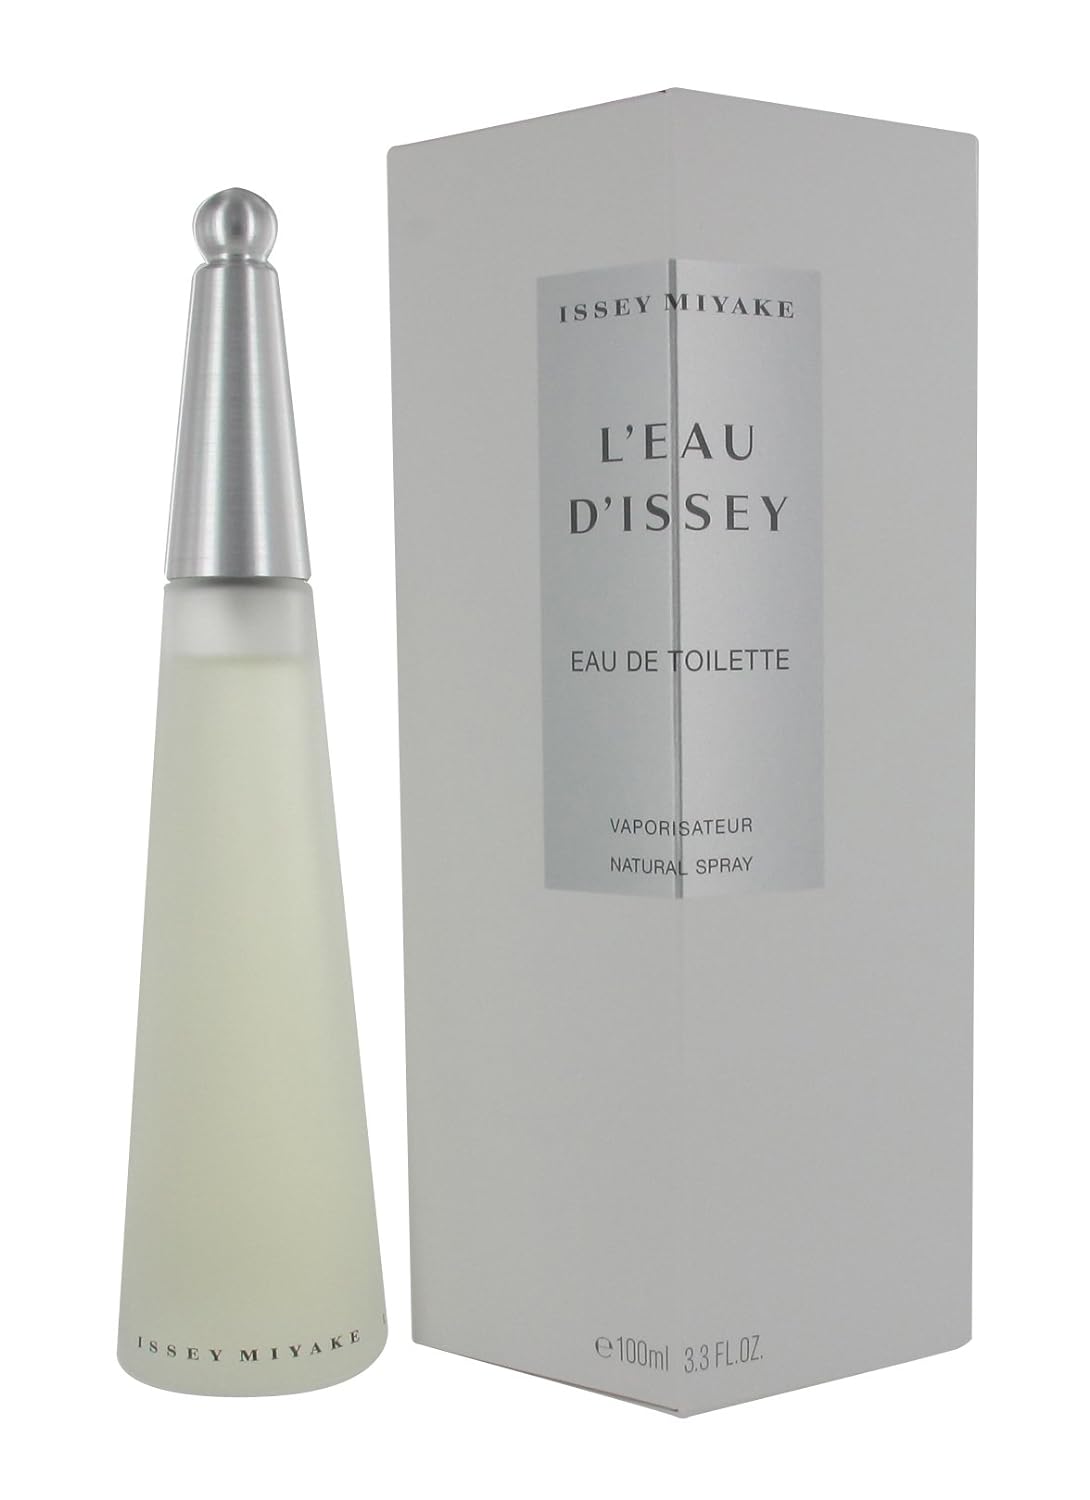 Issey Miyake L'Eau D'Issey femme/woman,